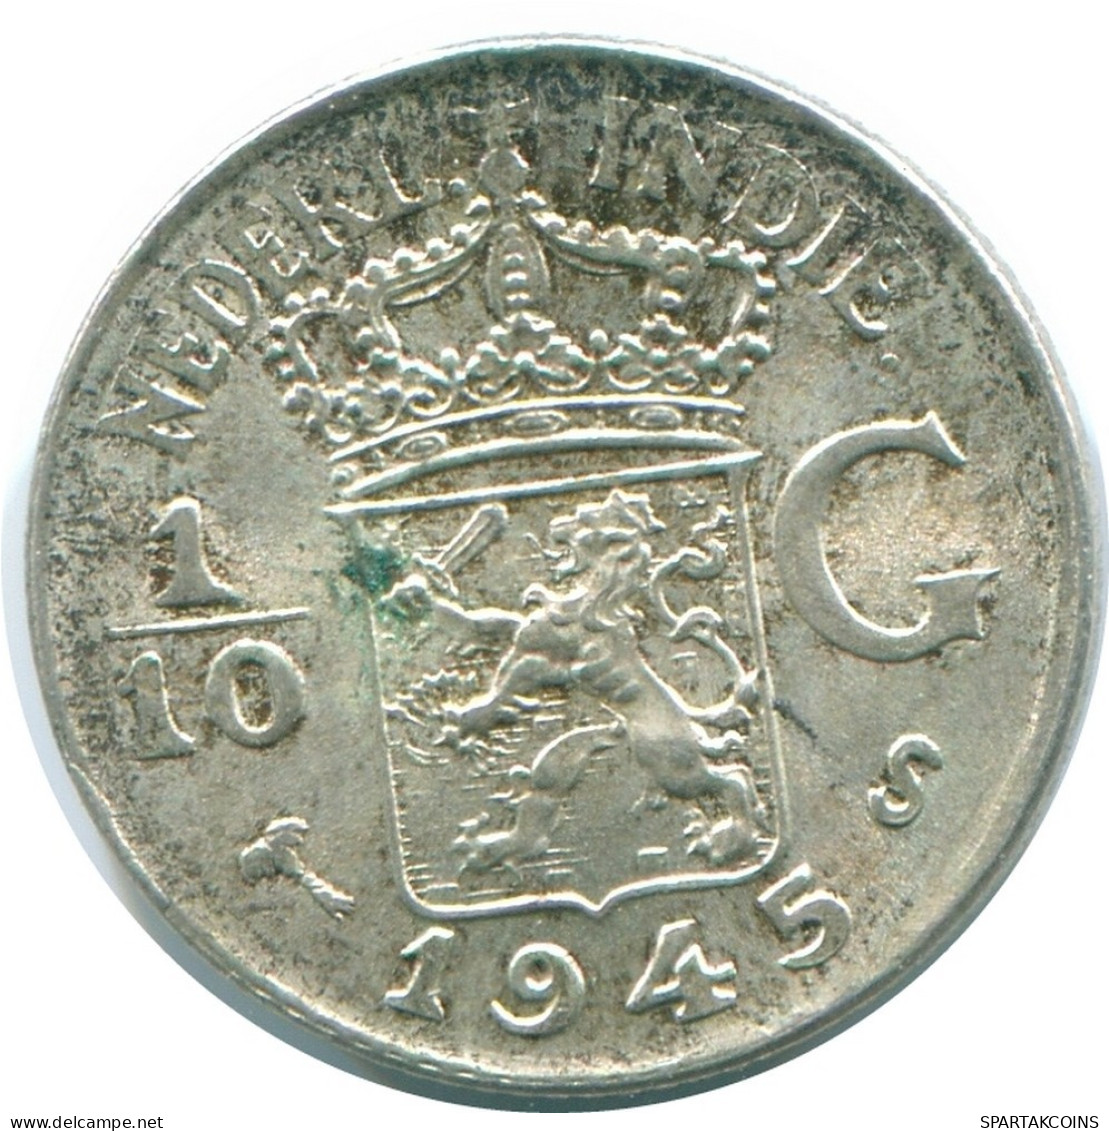 1/10 GULDEN 1945 S NETHERLANDS EAST INDIES SILVER Colonial Coin #NL14100.3.U.A - Indie Olandesi